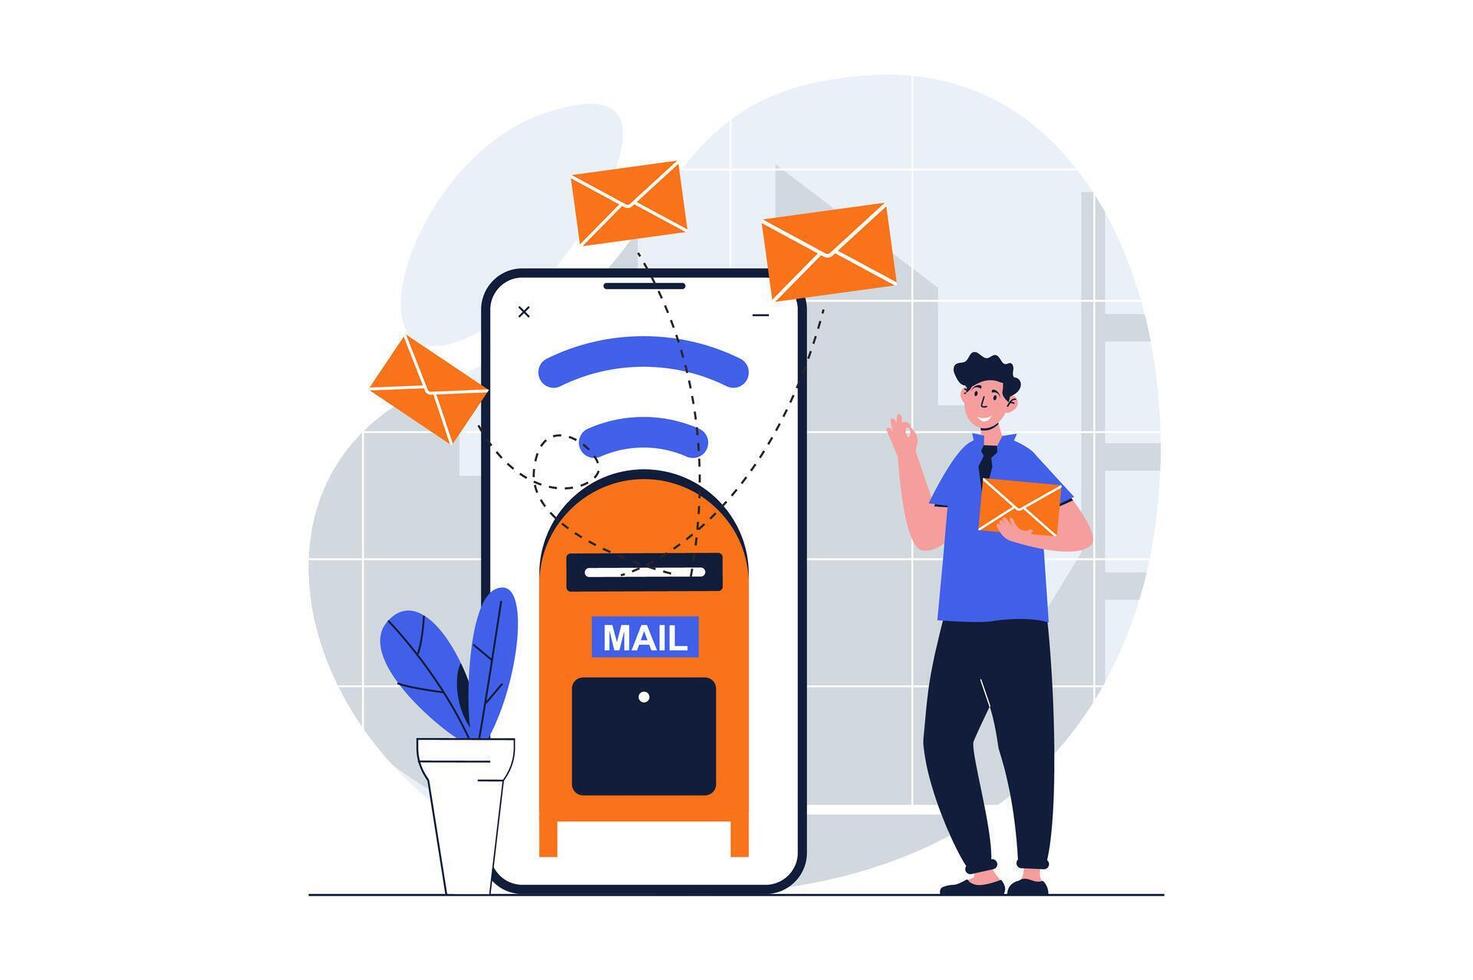 Email marketing web concept with character scene. Man makes advertising mailing and sending mails to clients. People situation in flat design. Vector illustration for social media marketing material.